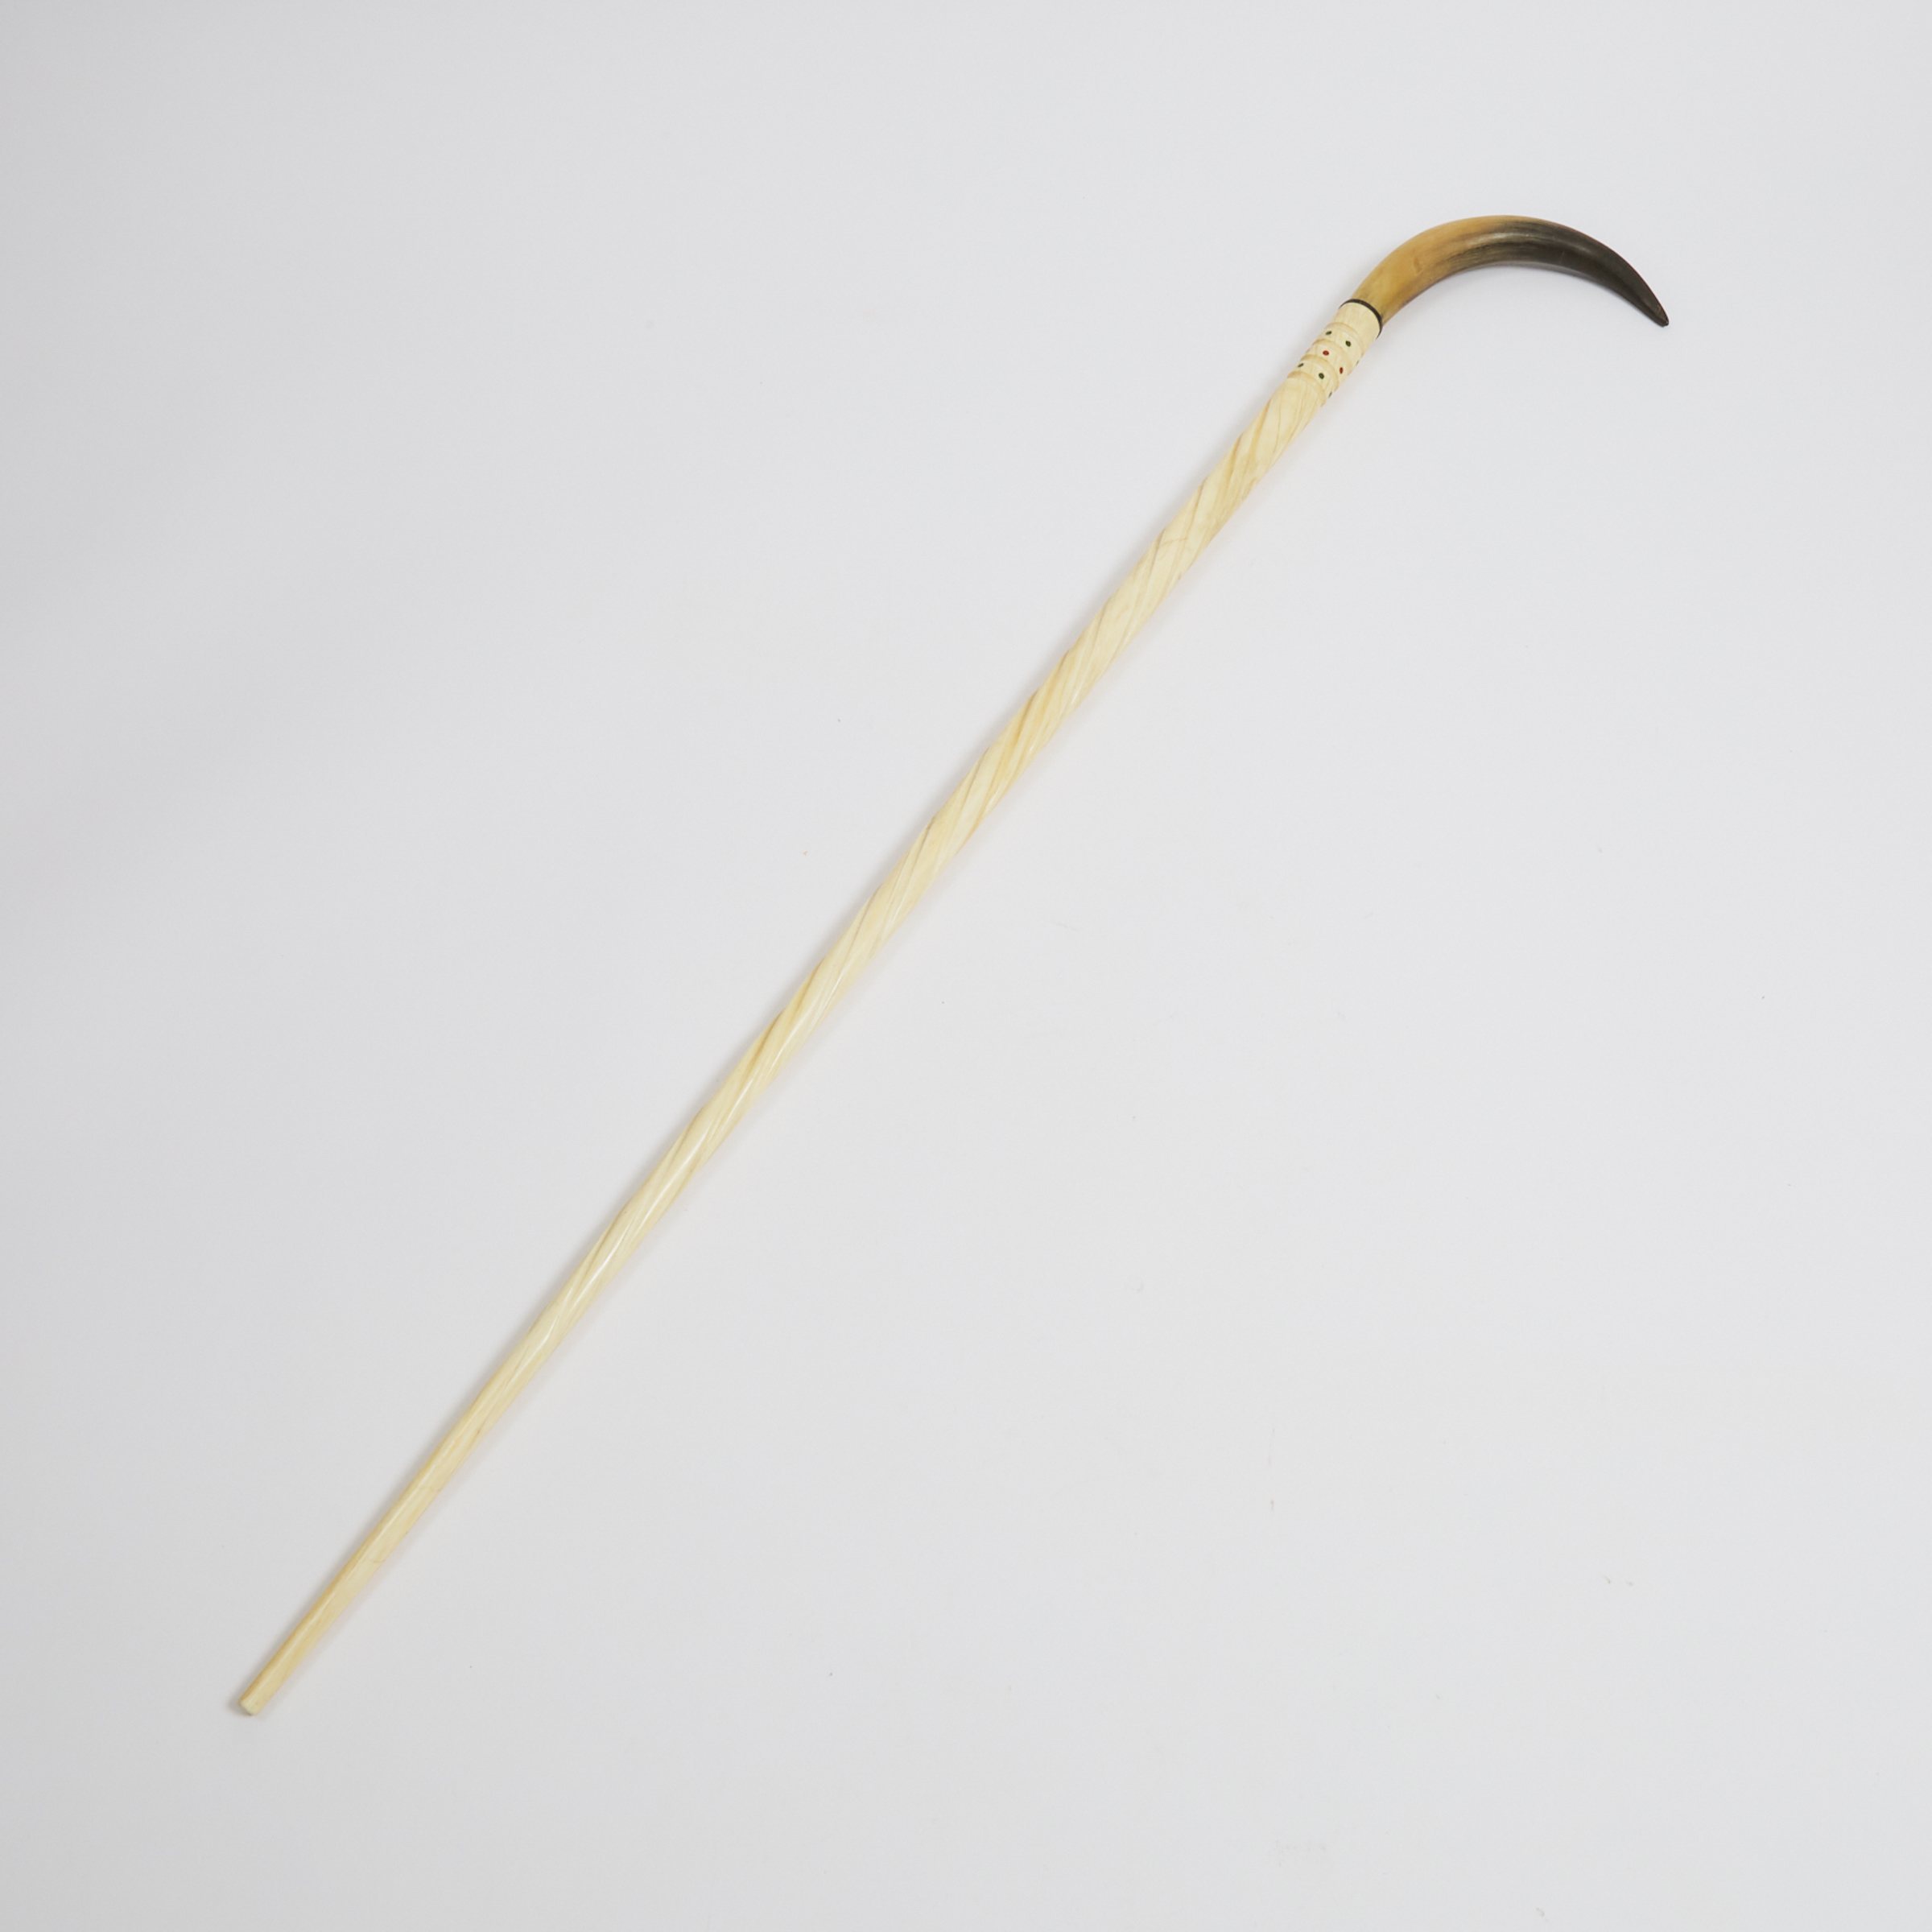 Narwhal Tusk Cane, early-mid 20th century